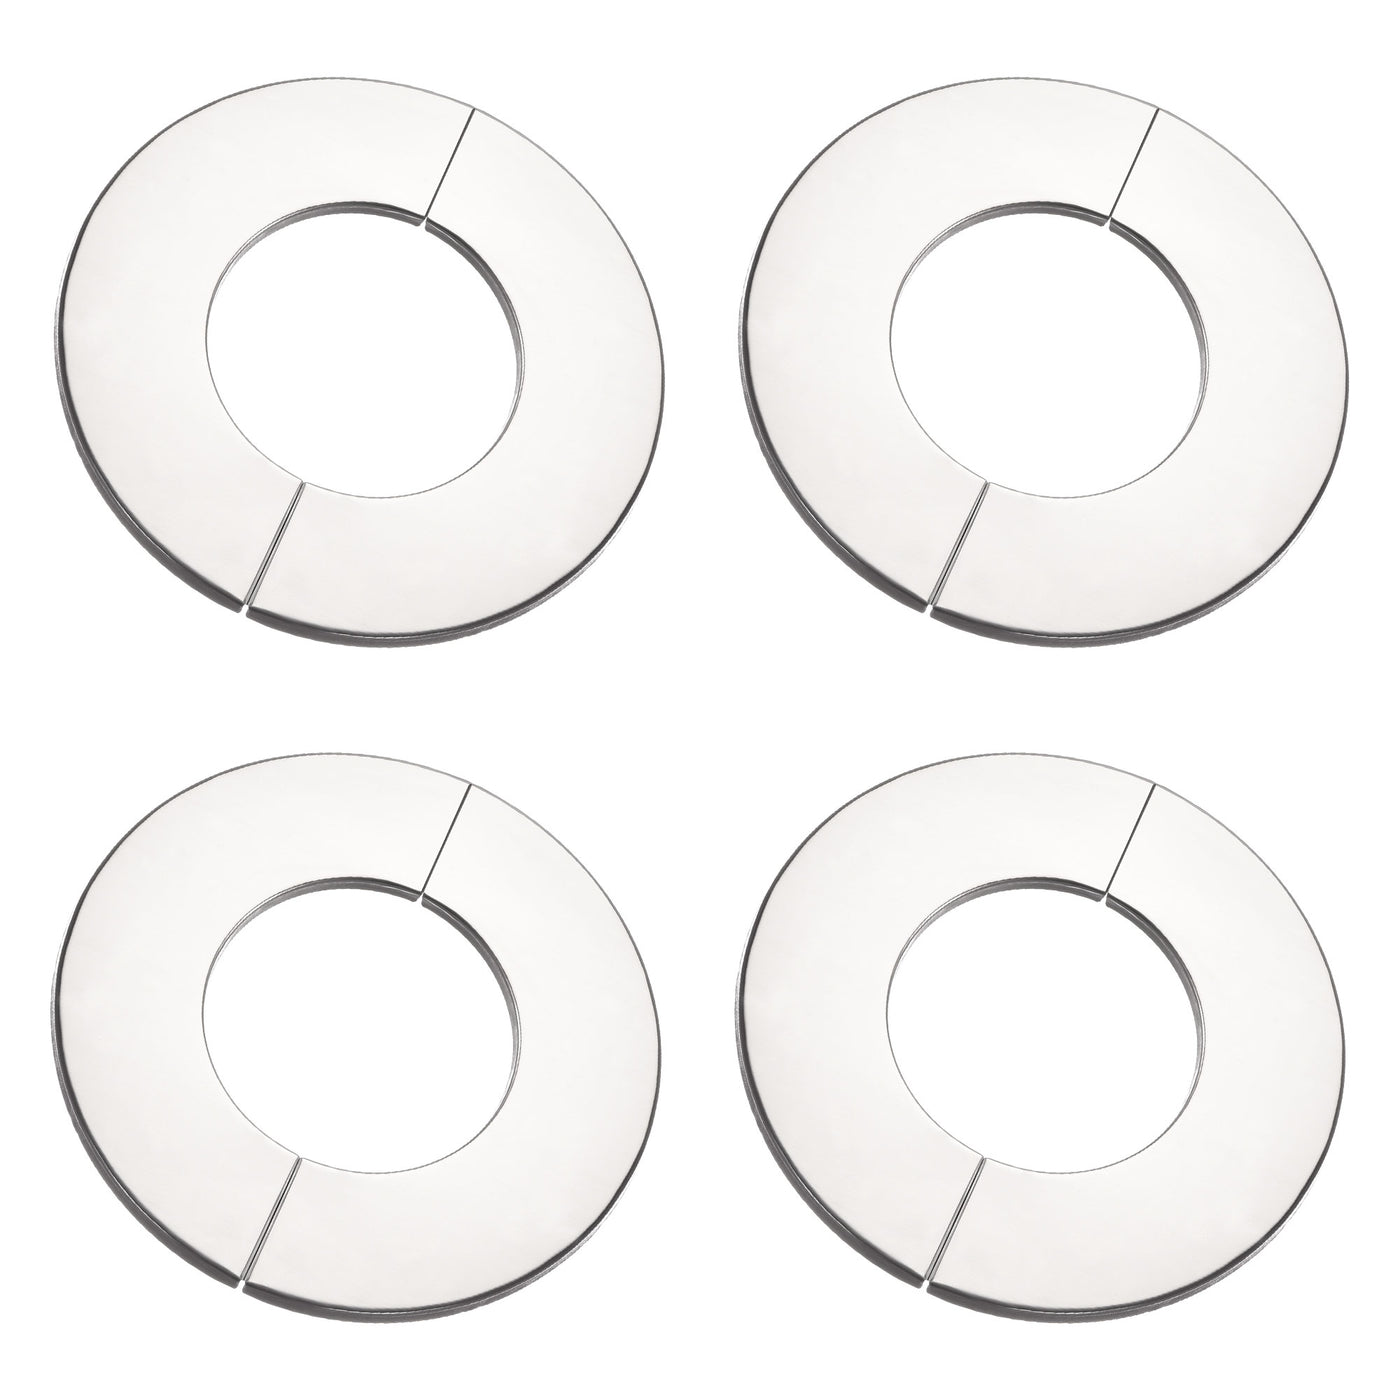 uxcell Uxcell Wall Split Flange, Stainless Steel Round Escutcheon Plate 4Pcs